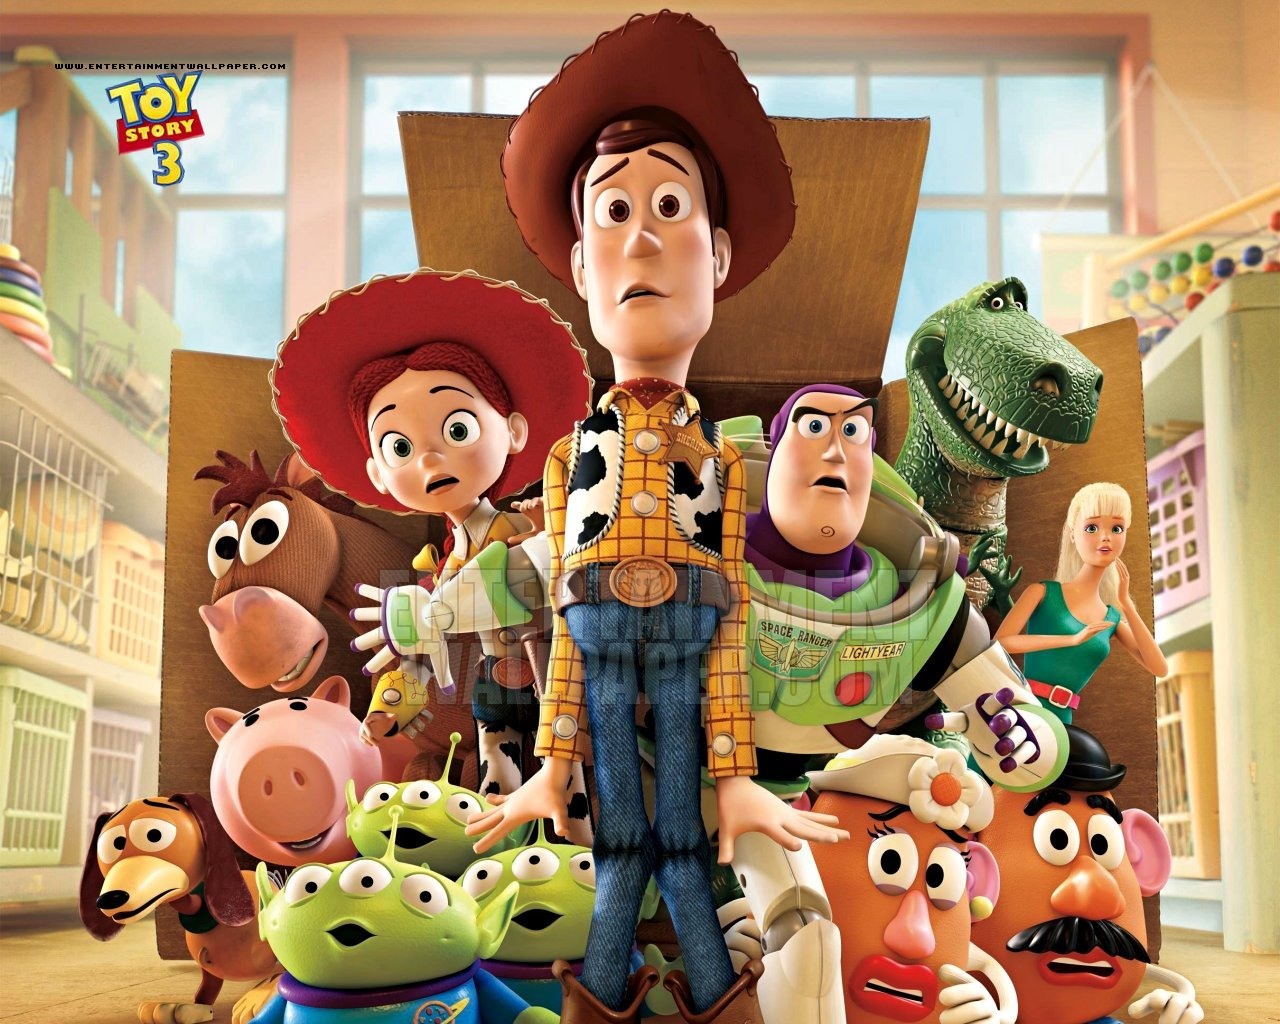 Toy Story 3 Wallpaper 1280x1024